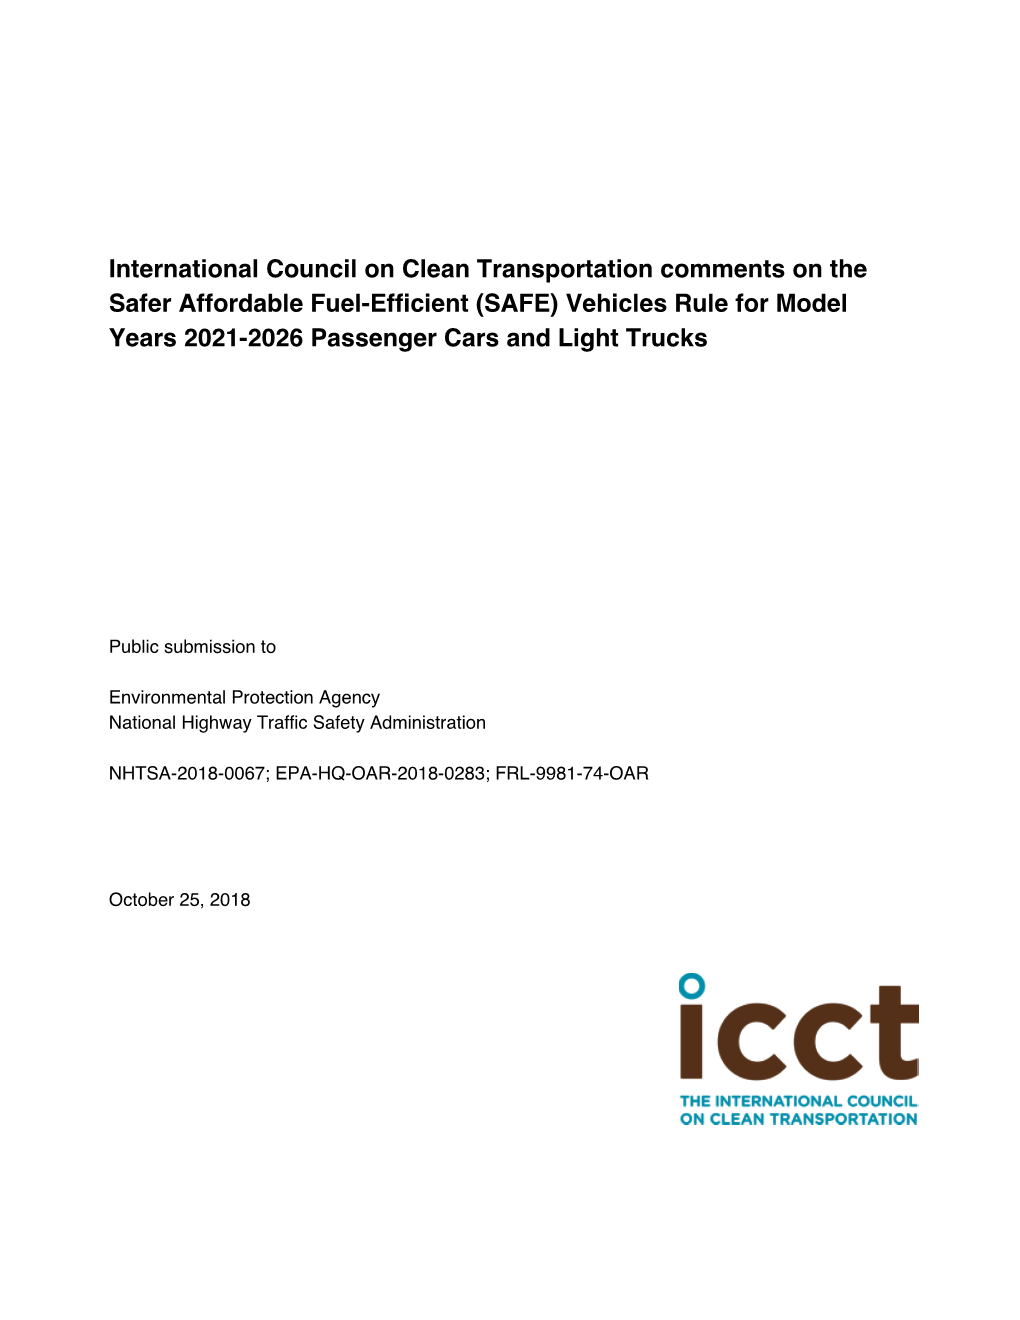 International Council on Clean Transportation Comments on the Safer Affordable Fuel-Efficient (SAFE) Vehicles Rule for Model